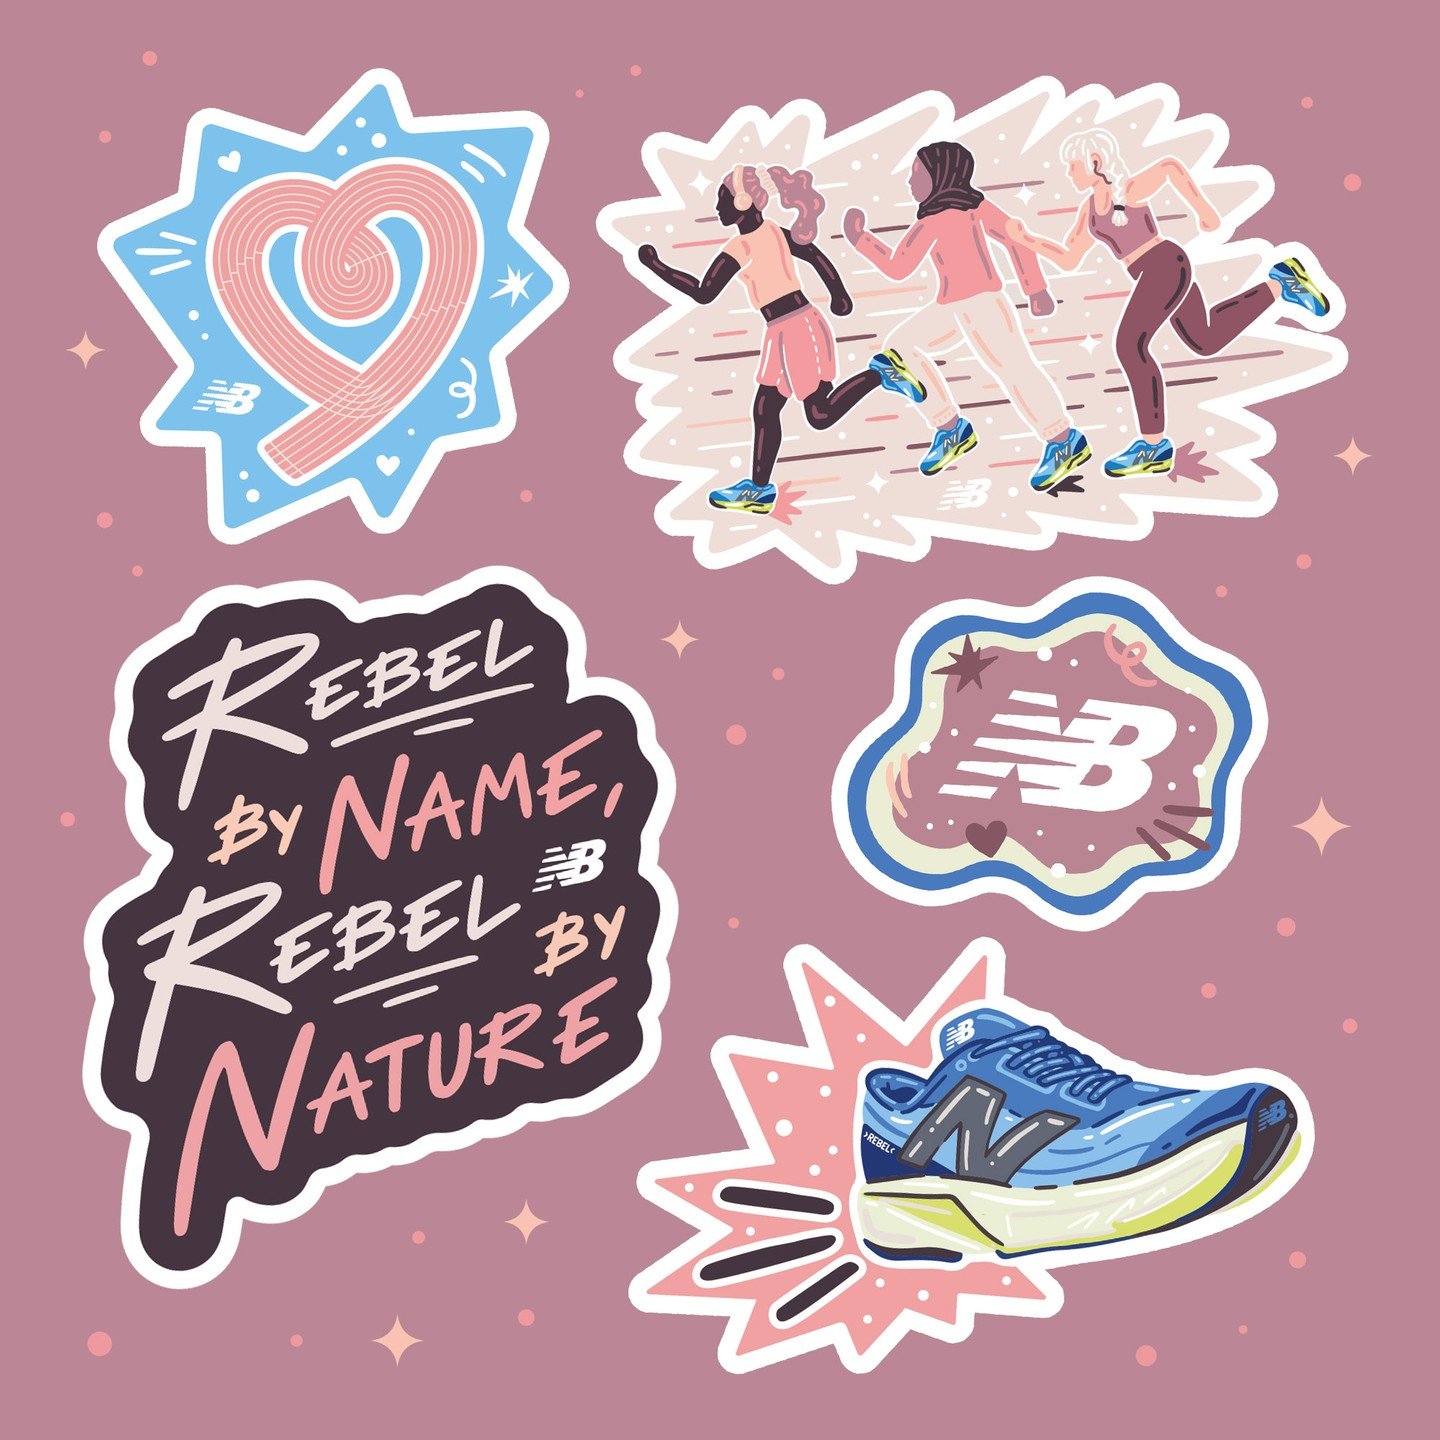 Happy Women's History Month!

New Balance and Gung Ho Communications tasked me with creating a bunch of illustrated assets for their Women's History Month celebration. The London event featured a coffee and run, in partnership with a women's aid char